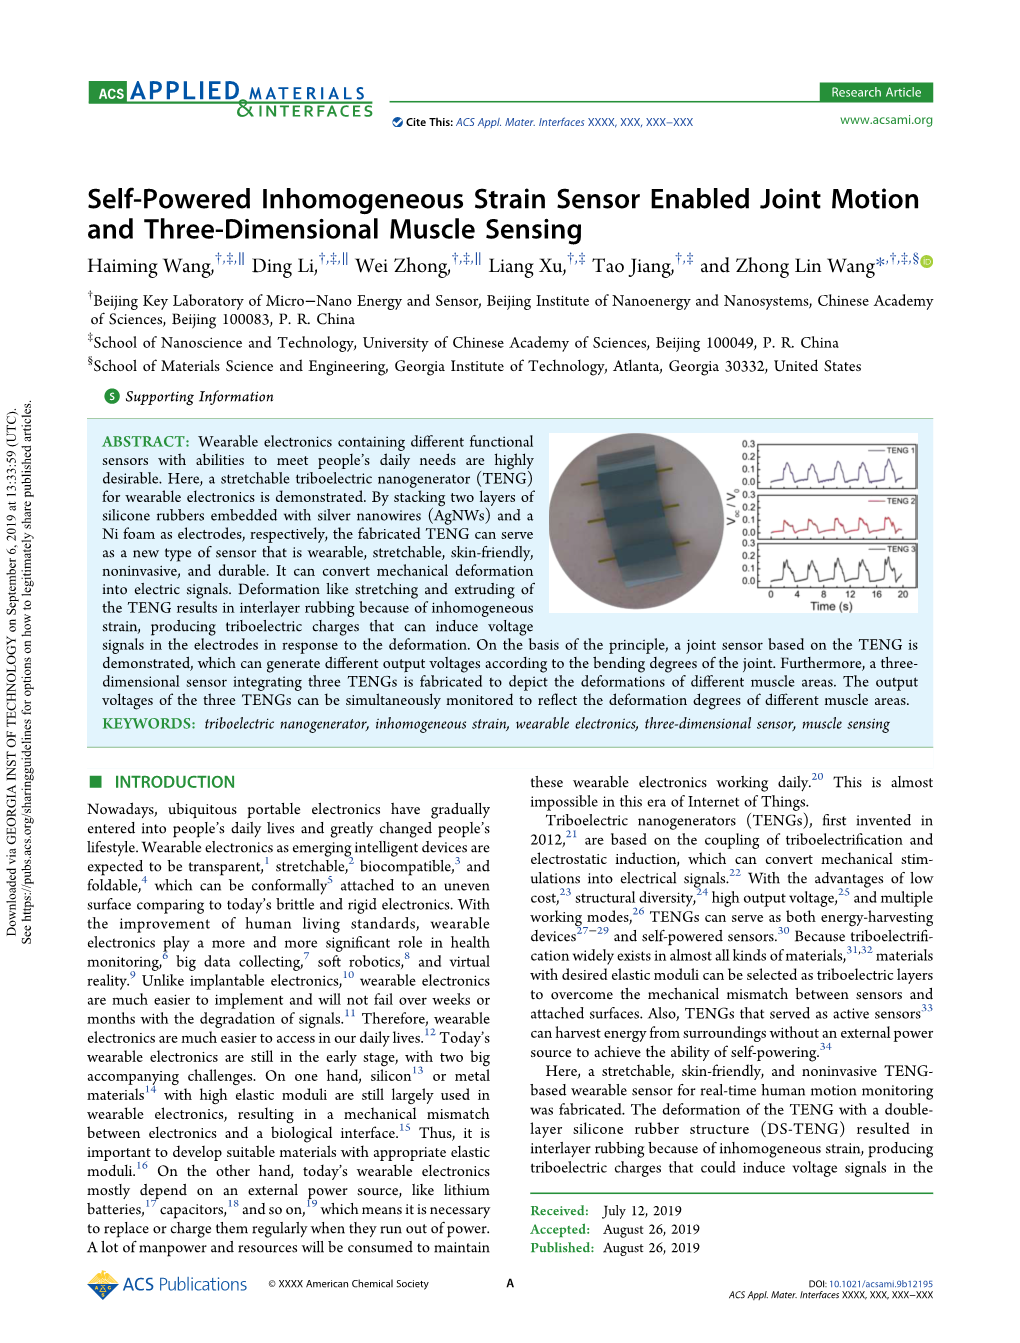 Self-Powered Inhomogeneous Strain Sensor Enabled Joint Motion And